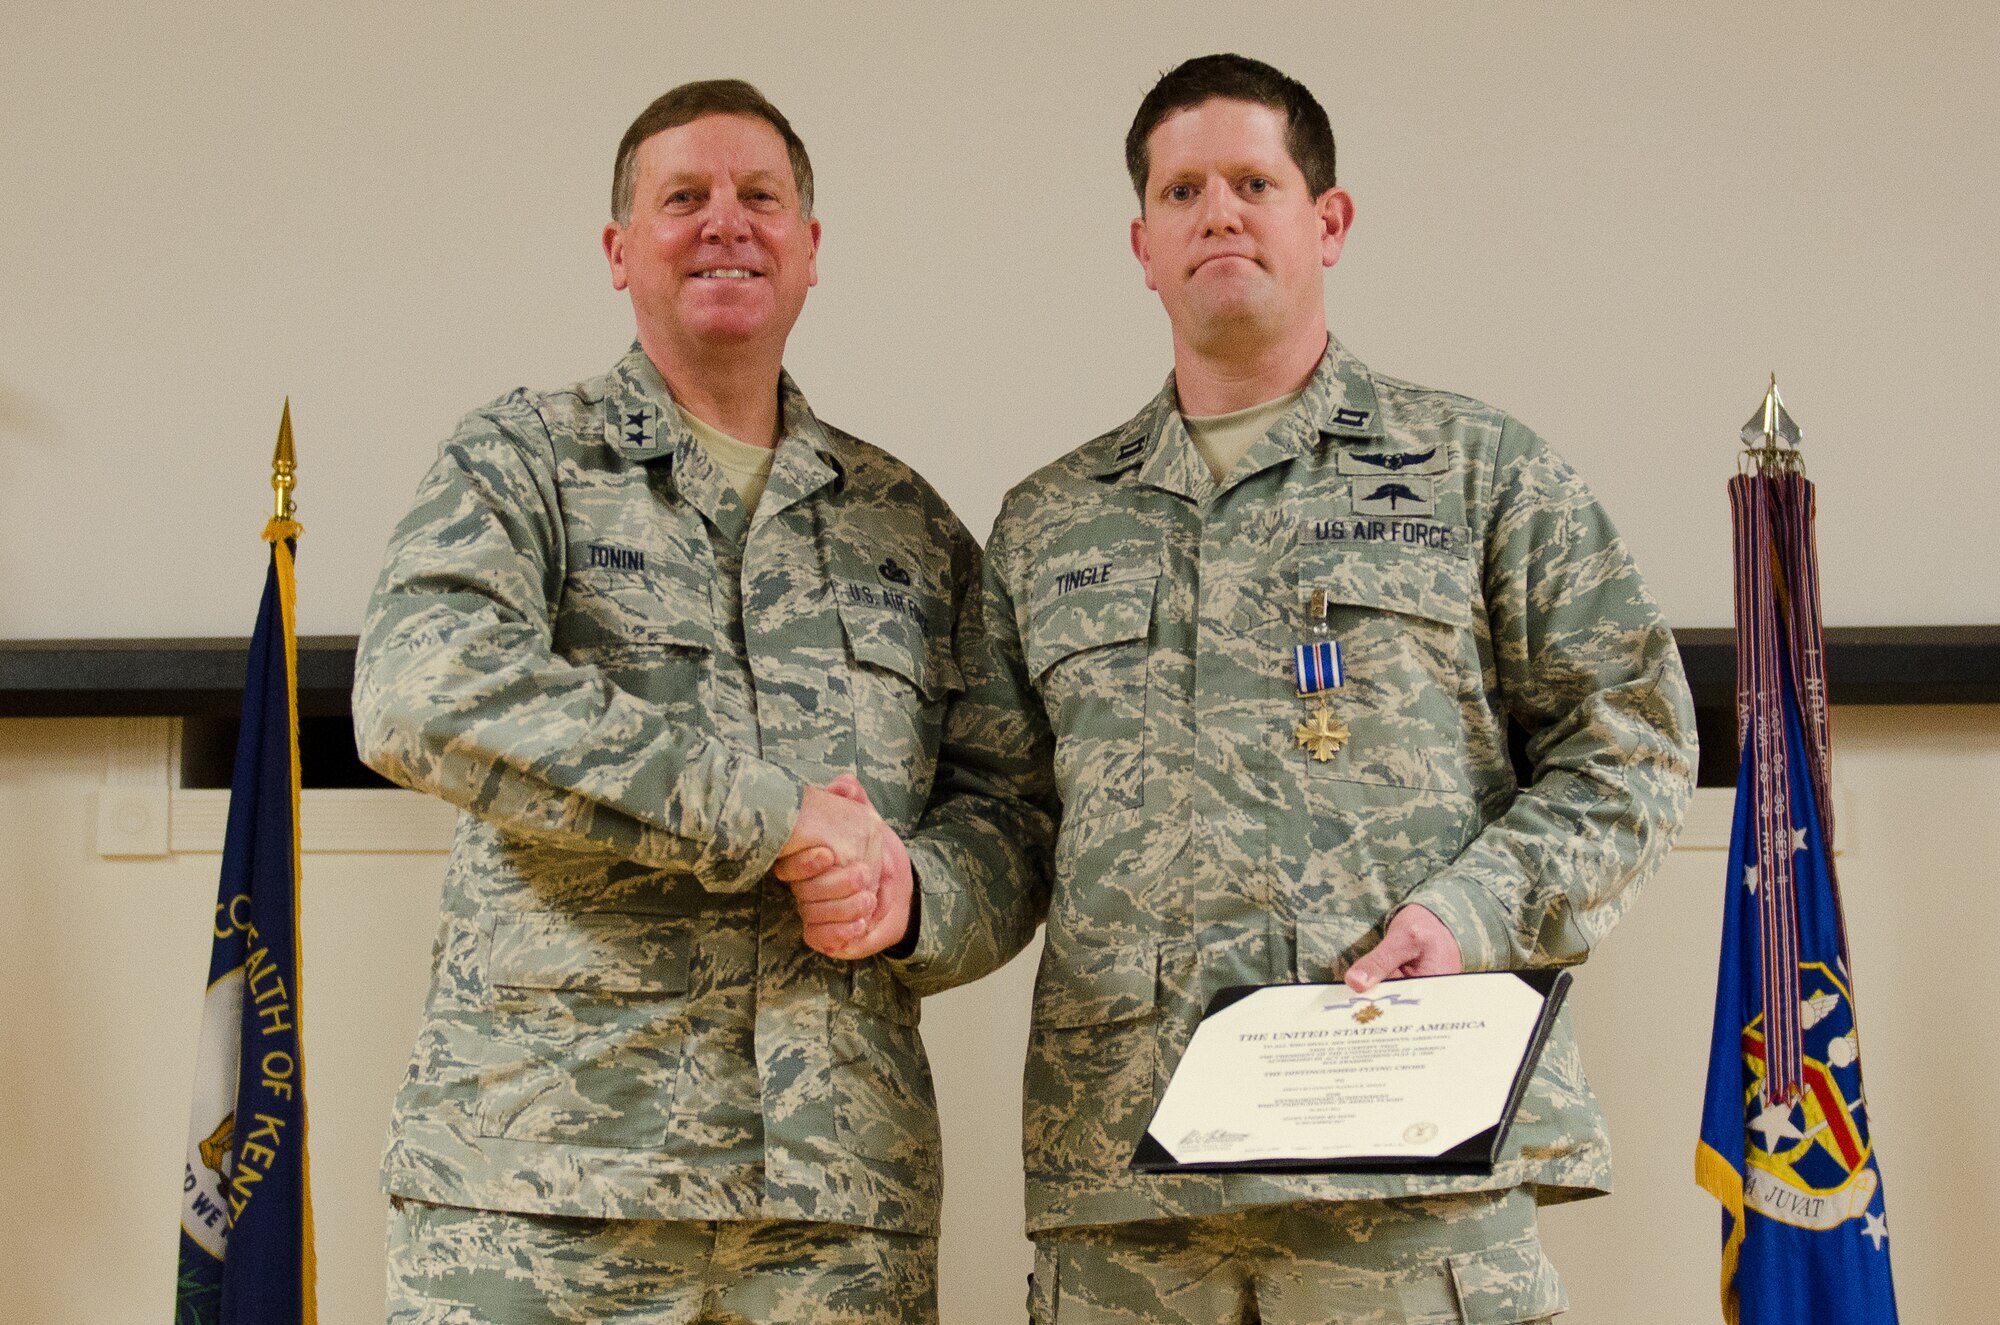 Kentucky’s adjutant general, Maj. Gen. Edward W. Tonini, presents Capt. Nathan Tingle, a combat rescue officer in the 123rd Special Tactics Squadron, with the Distinguished Flying Cross during an award ceremony held Jan. 12, 2014 at the Kentucky Air National Guard Base in Louisville, Ky. Tingle earned the award for extraordinary achievement while conducting rescue operations in Afghanistan in 2011. (U.S. Air National Guard photo by Airman 1st Class Joshua Horton)